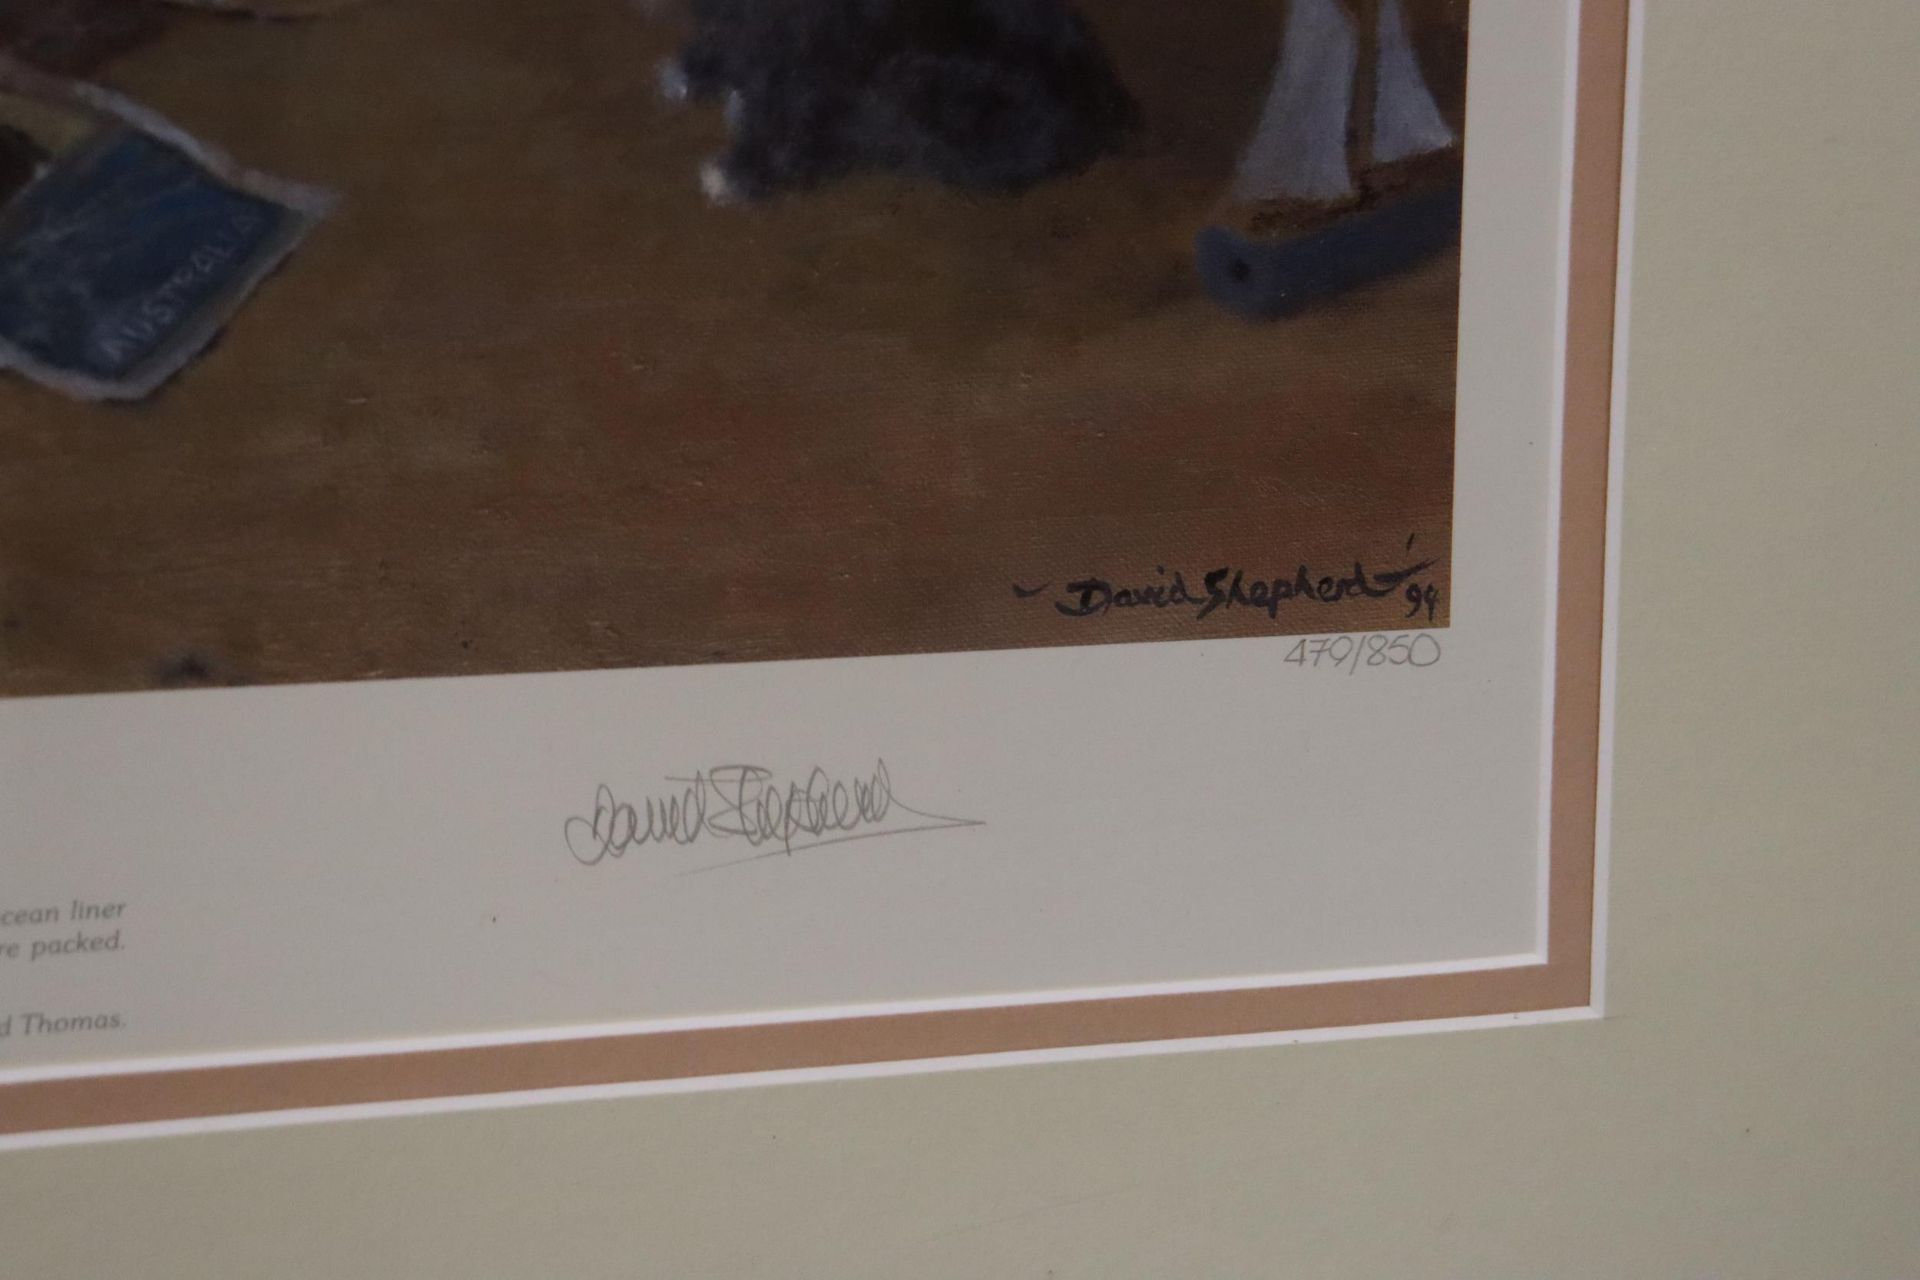 A LIMITED EDITION 479/850, SIGNED DAVID SHEPHERD, PRINT TITLED 'BUT TEDDY DOESN'T NEED A TICKET', - Image 3 of 6